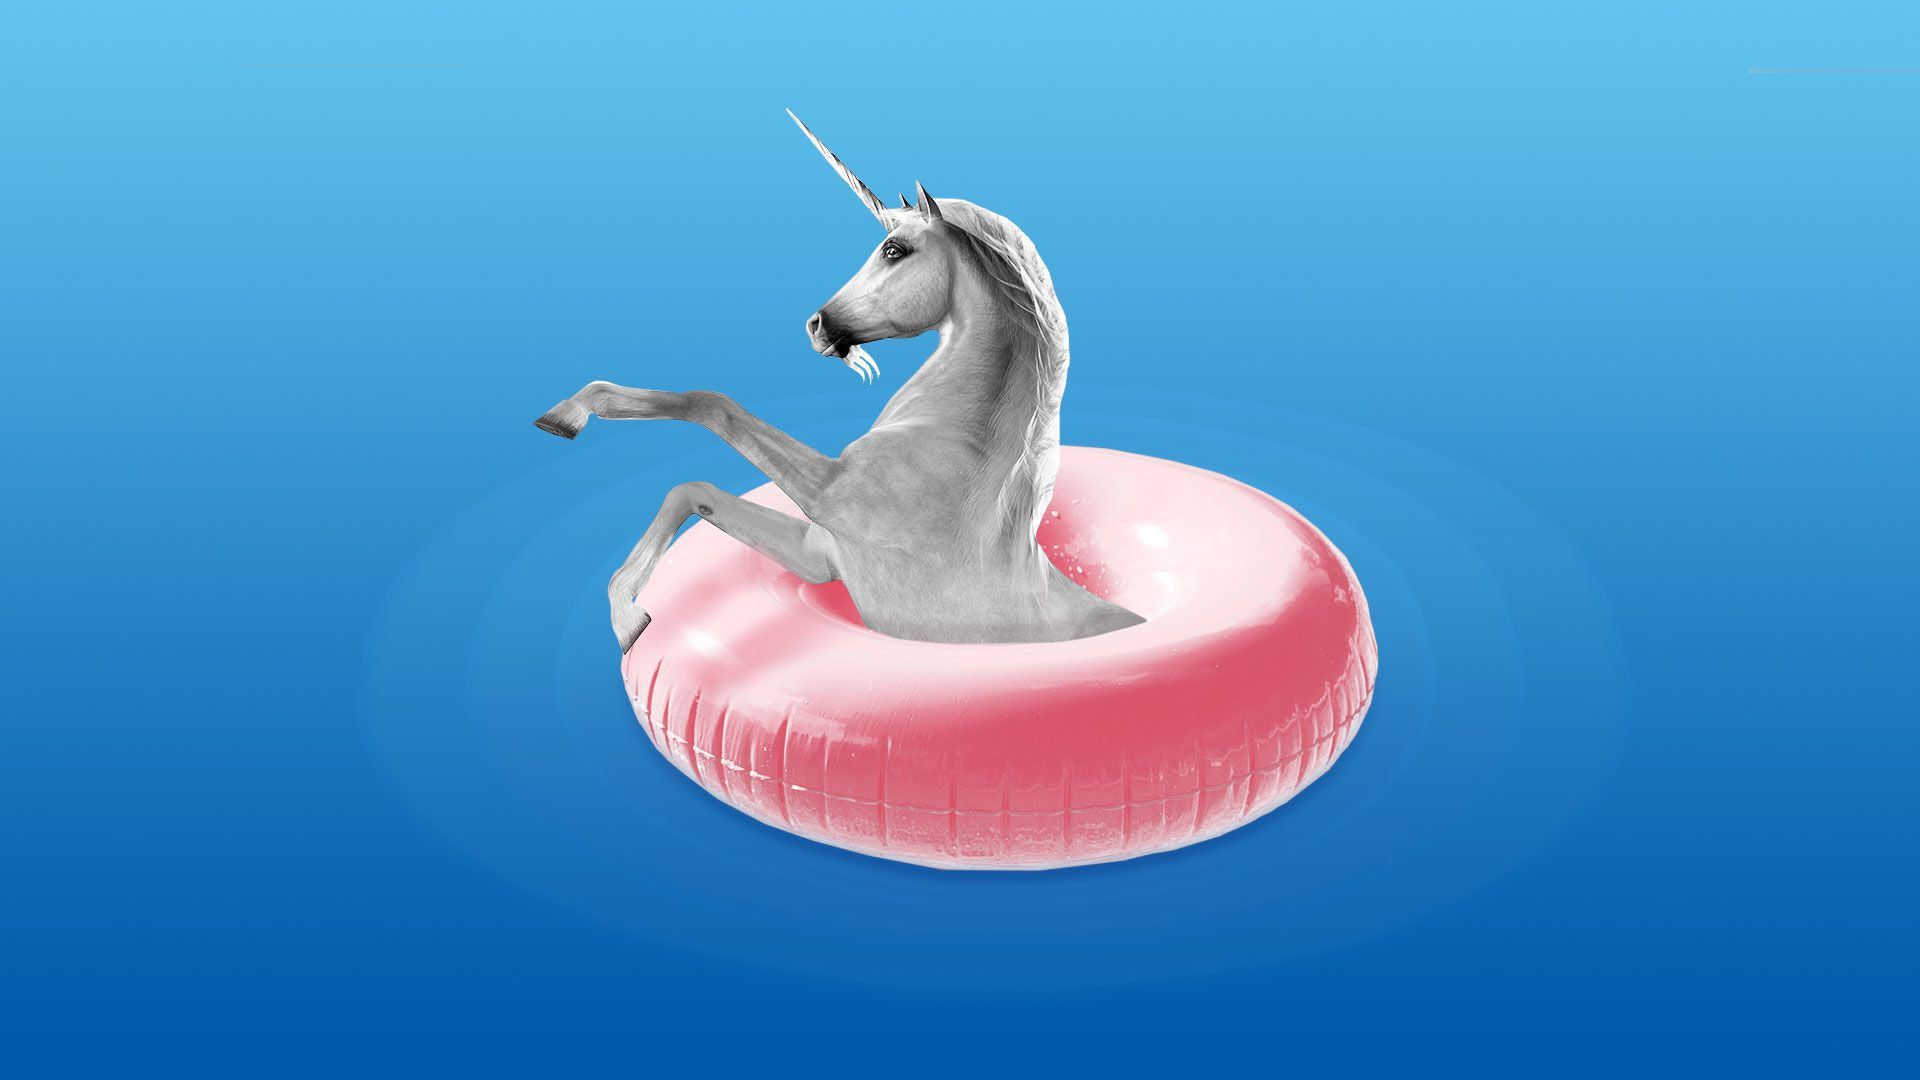 Illustration of a unicorn in a raft